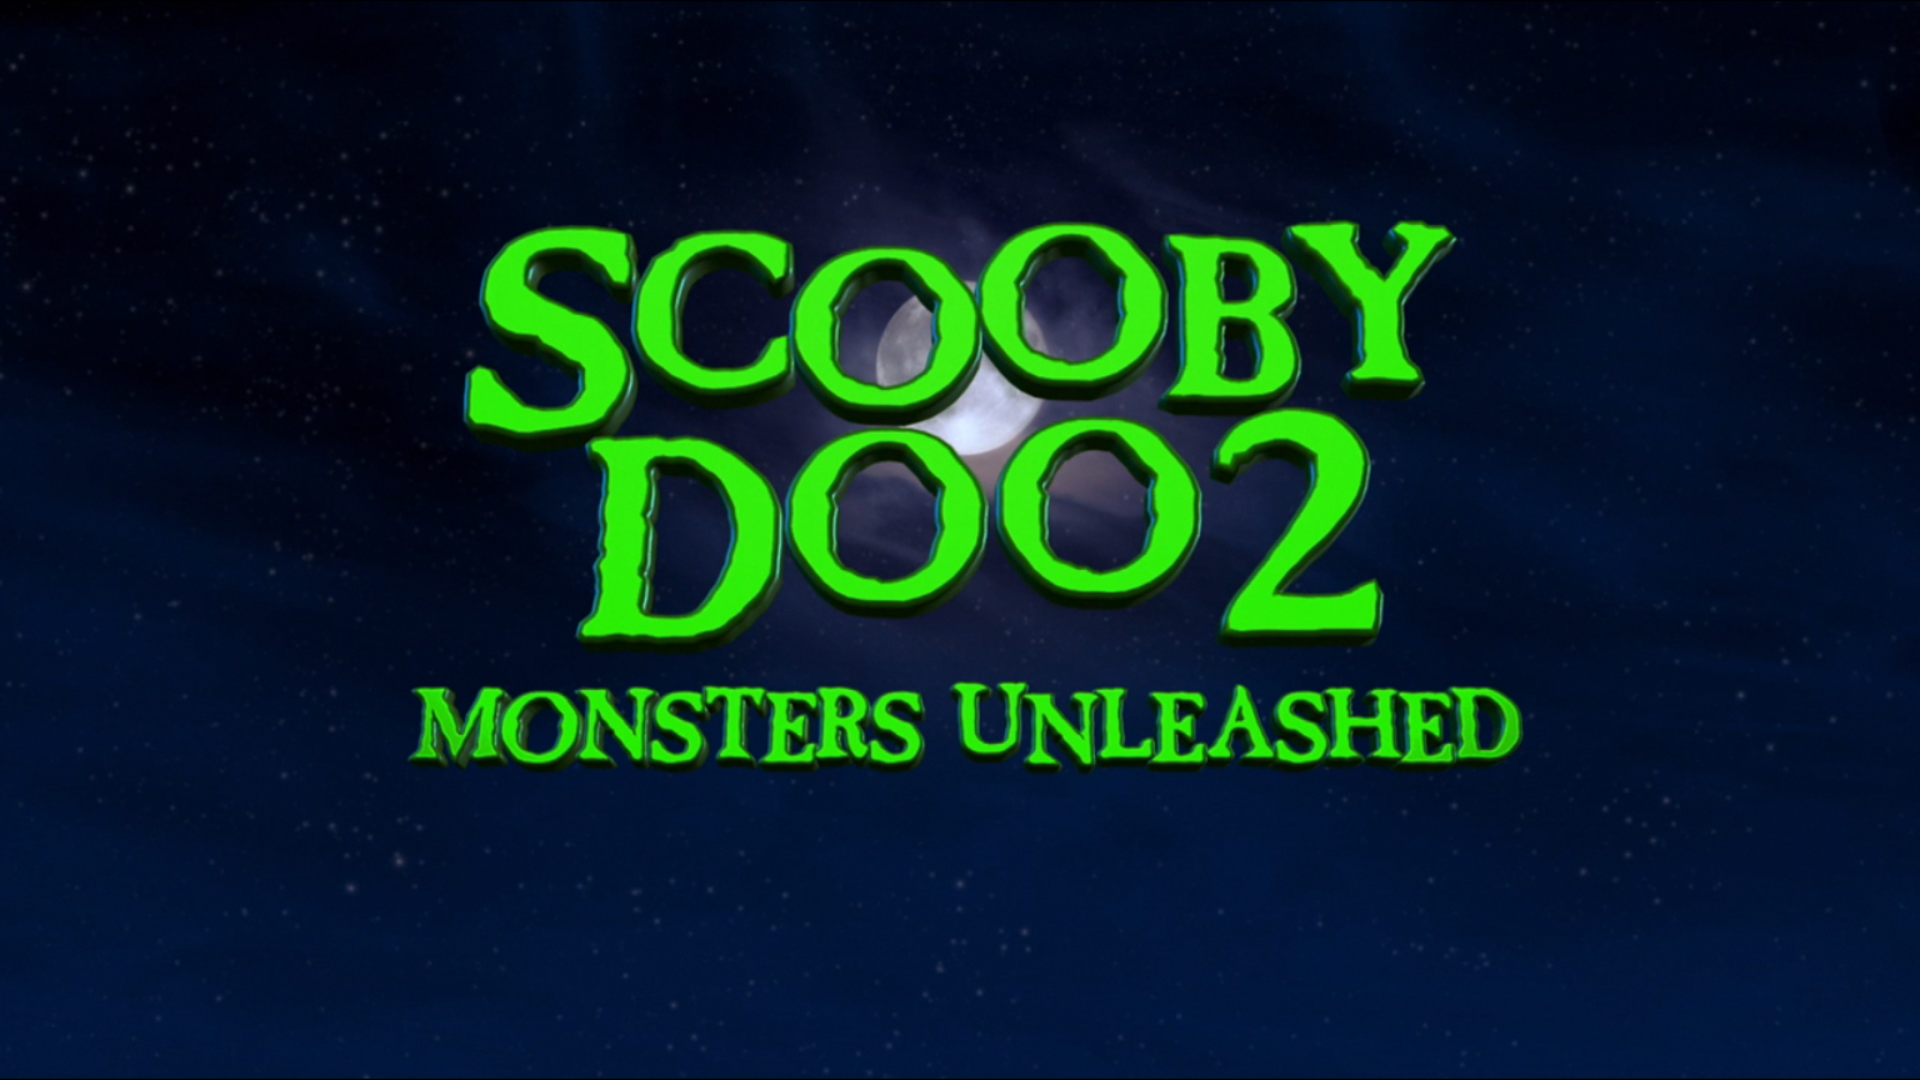 Opening to scooby doo 2 monsters unleashed dvd - libertypassl